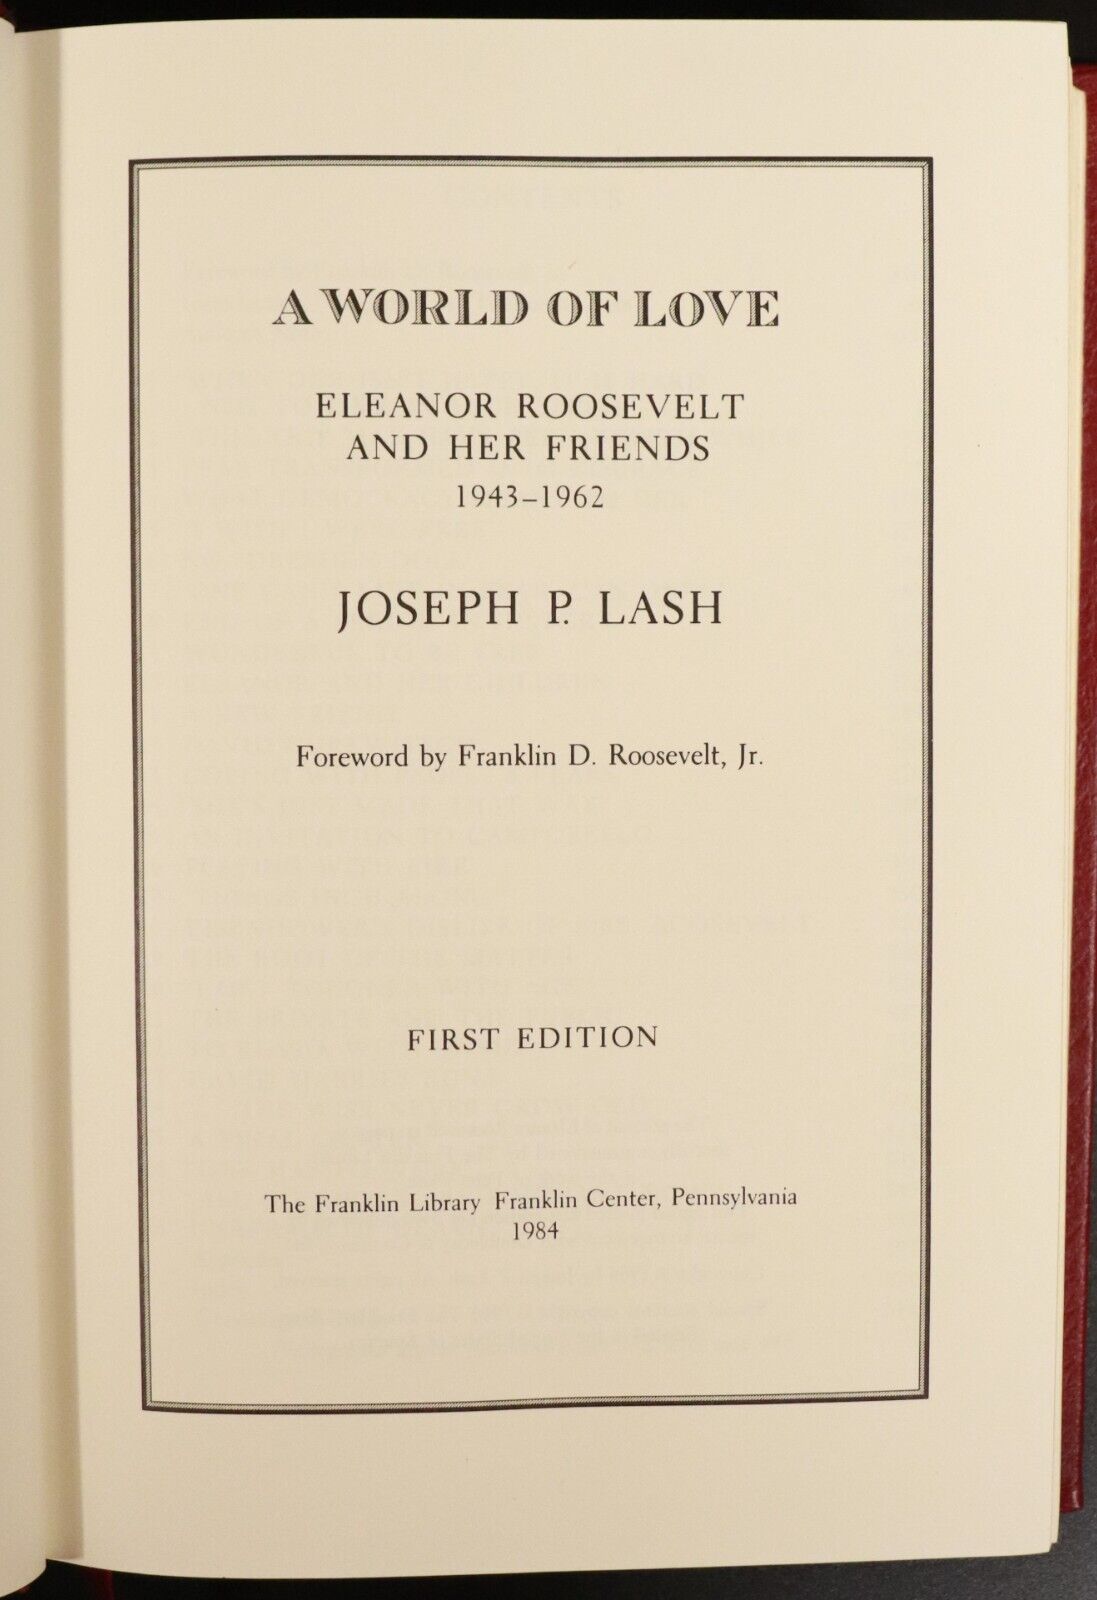 1984 A World Of Love E. Roosevelt by JP Lash 1st Ed SIGNED Franklin Library Book